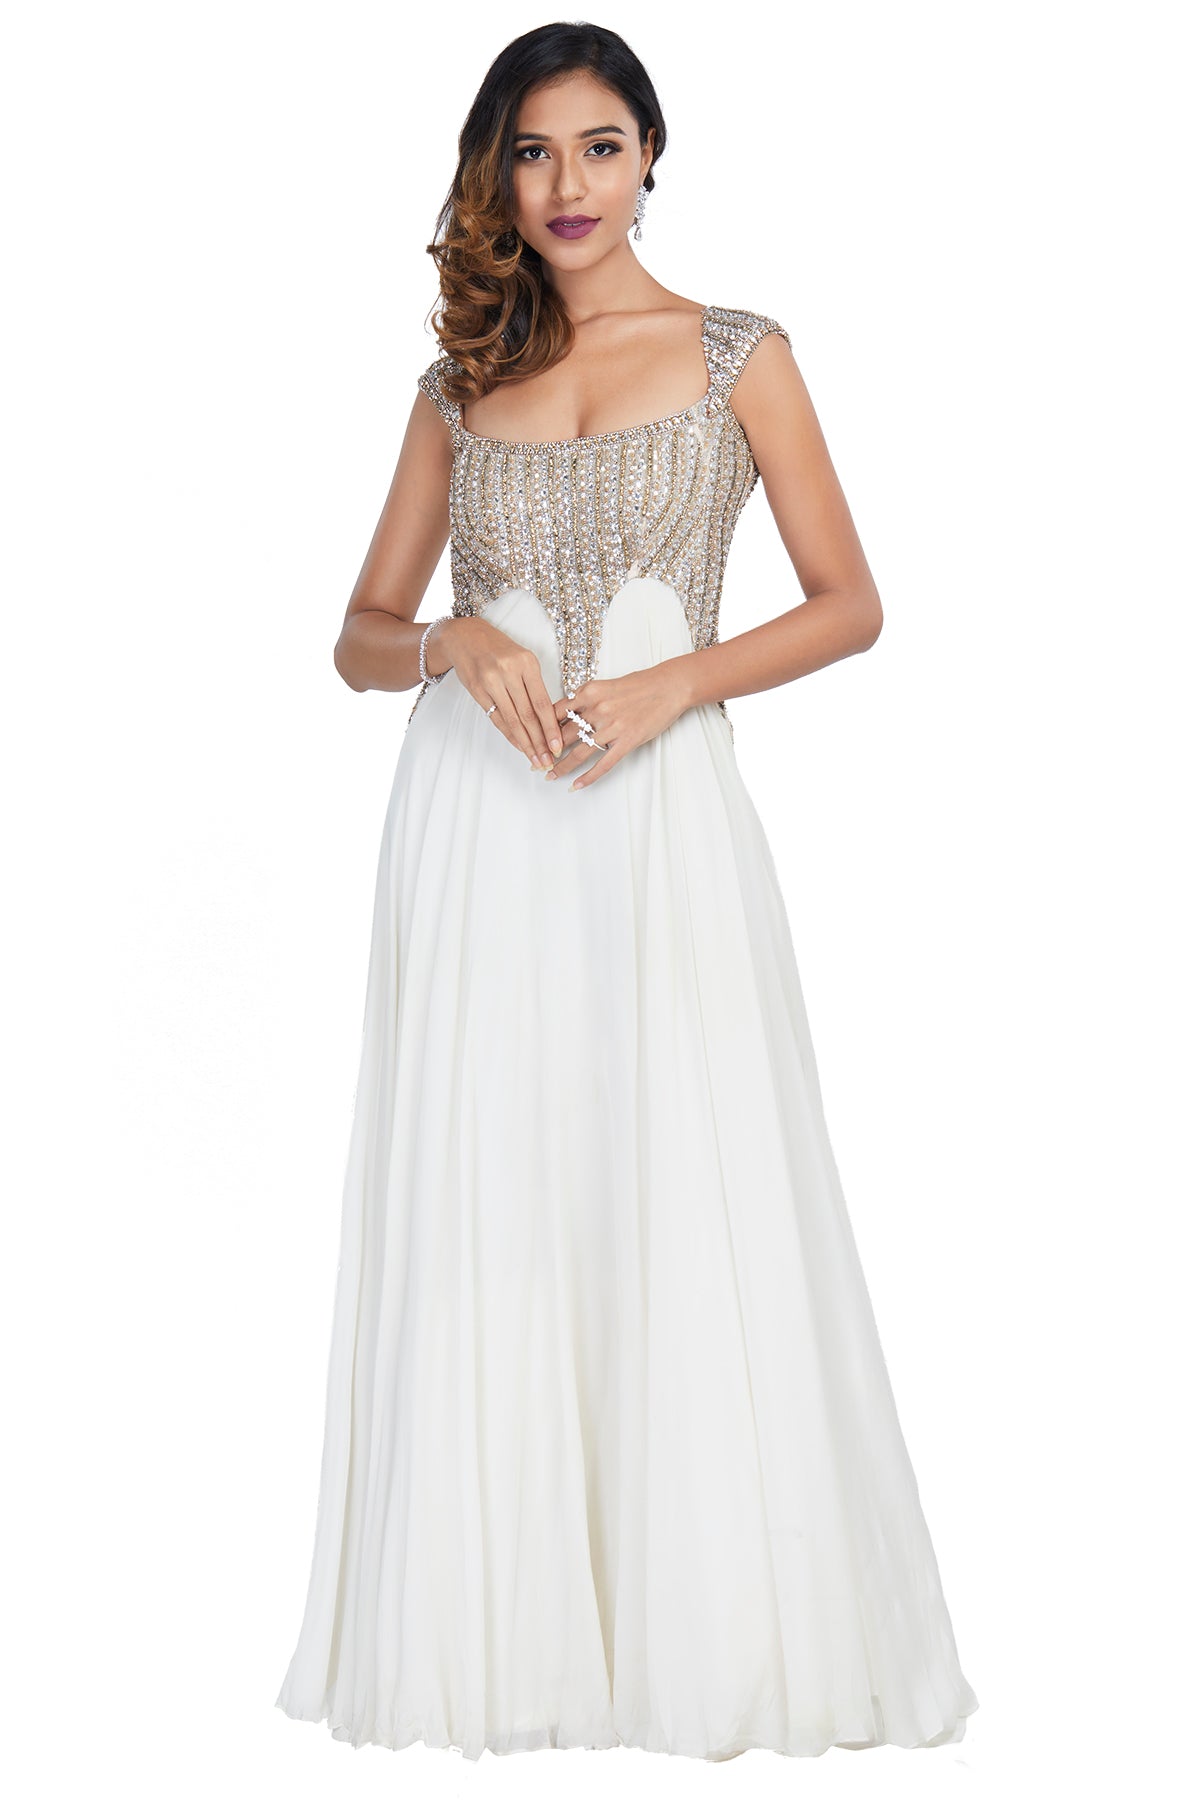 You cannot go unnoticed in this stunning deep neck, gold and white embellished gown with a sexy back!
